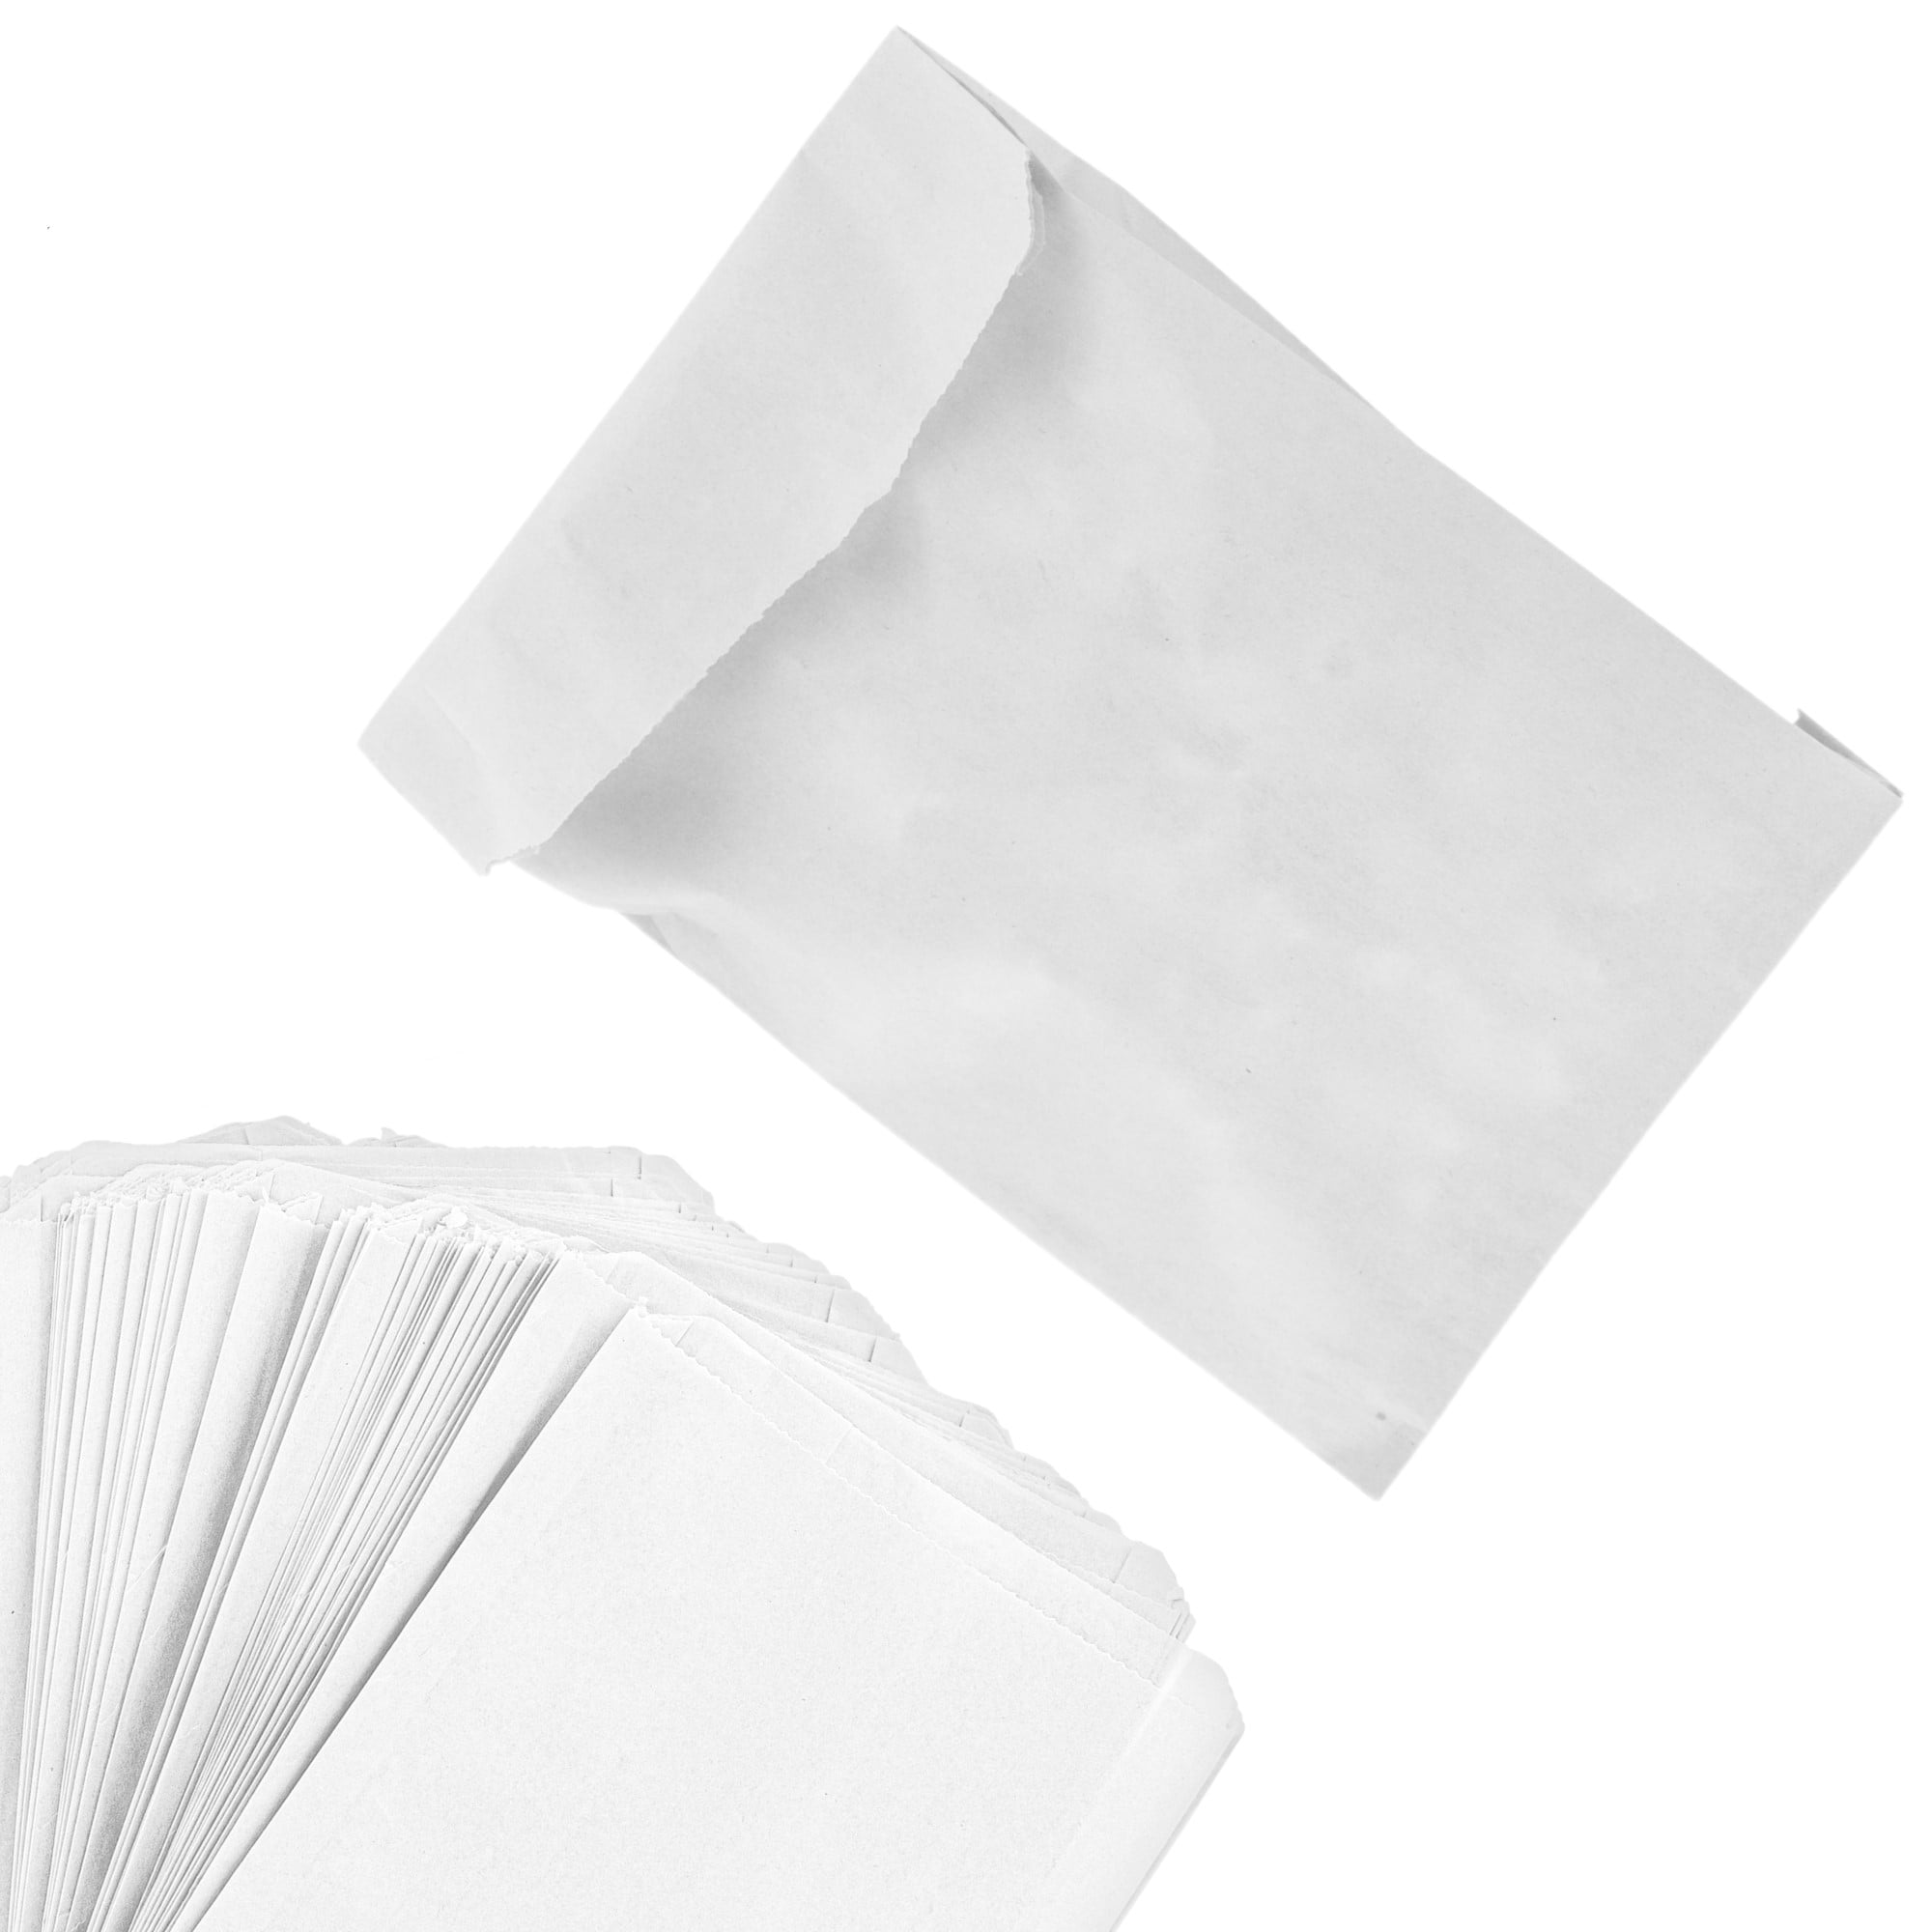 MT Products 6 x 4.5 White Wax Small Paper Bags/Glassine Bag